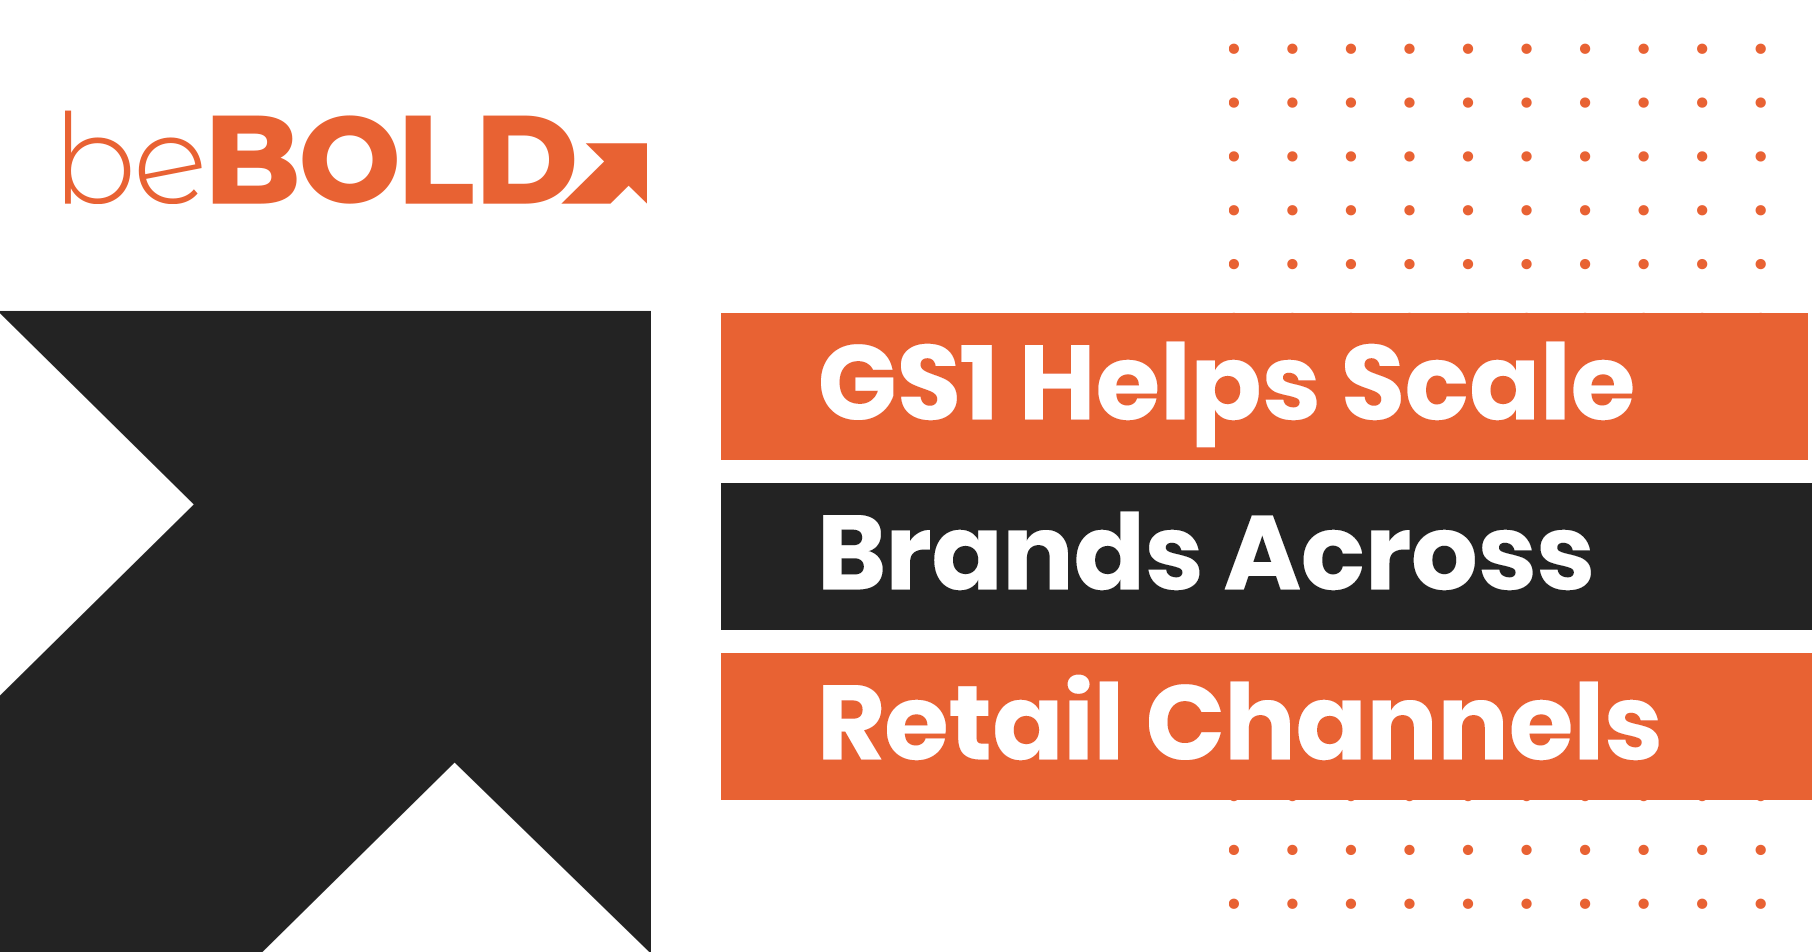 GS1 Standards Help Scale your Brand Across all Channels of Retail